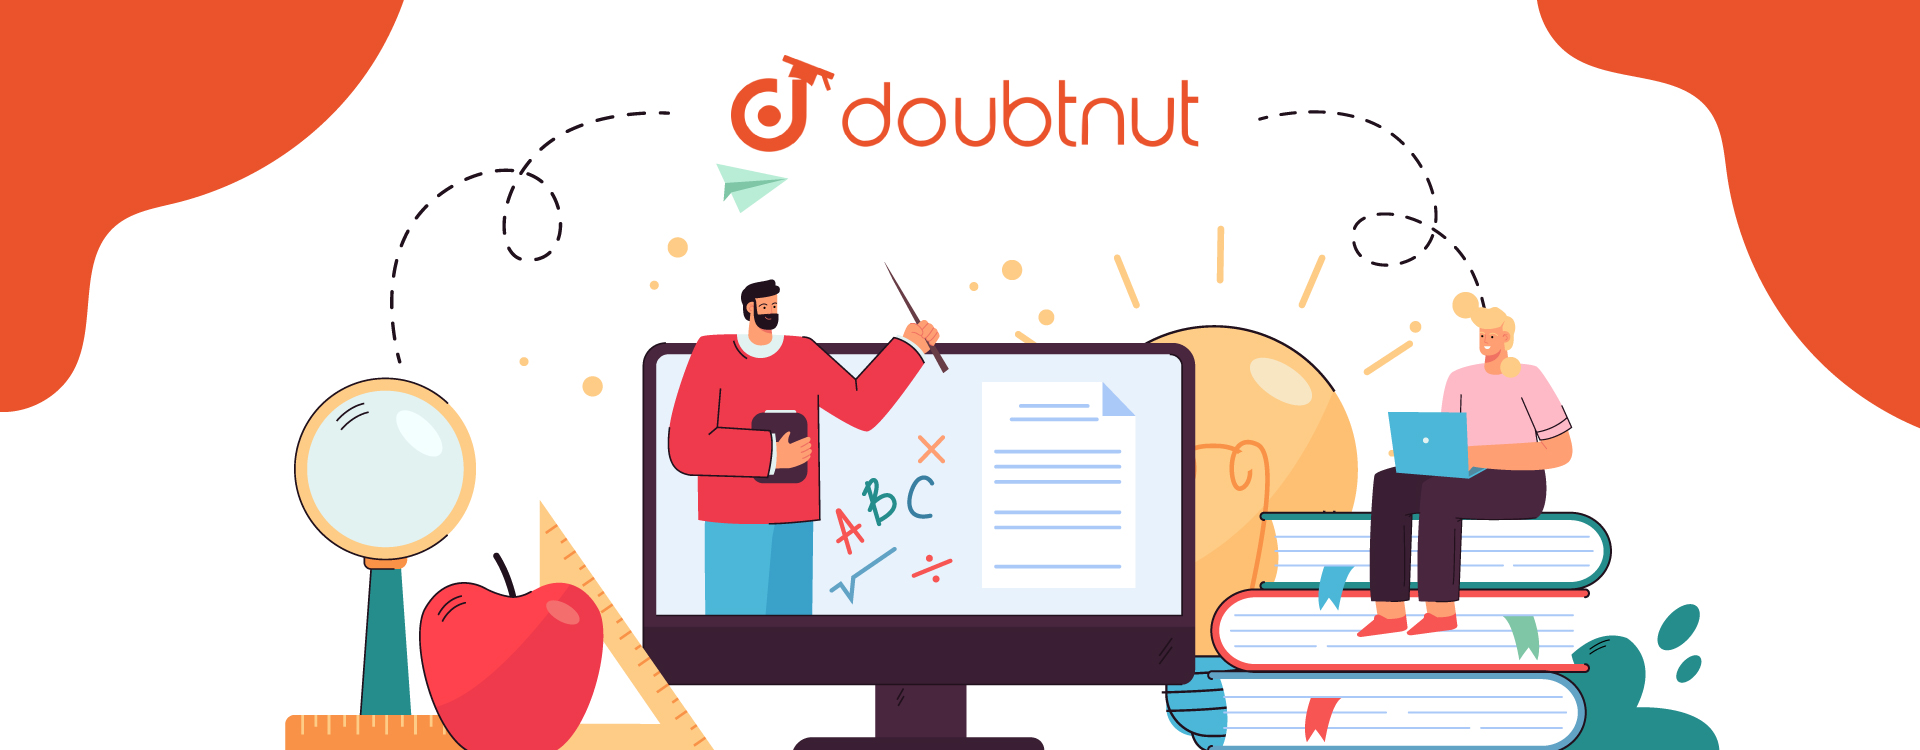 Doubtnut the unique real time edtech startup